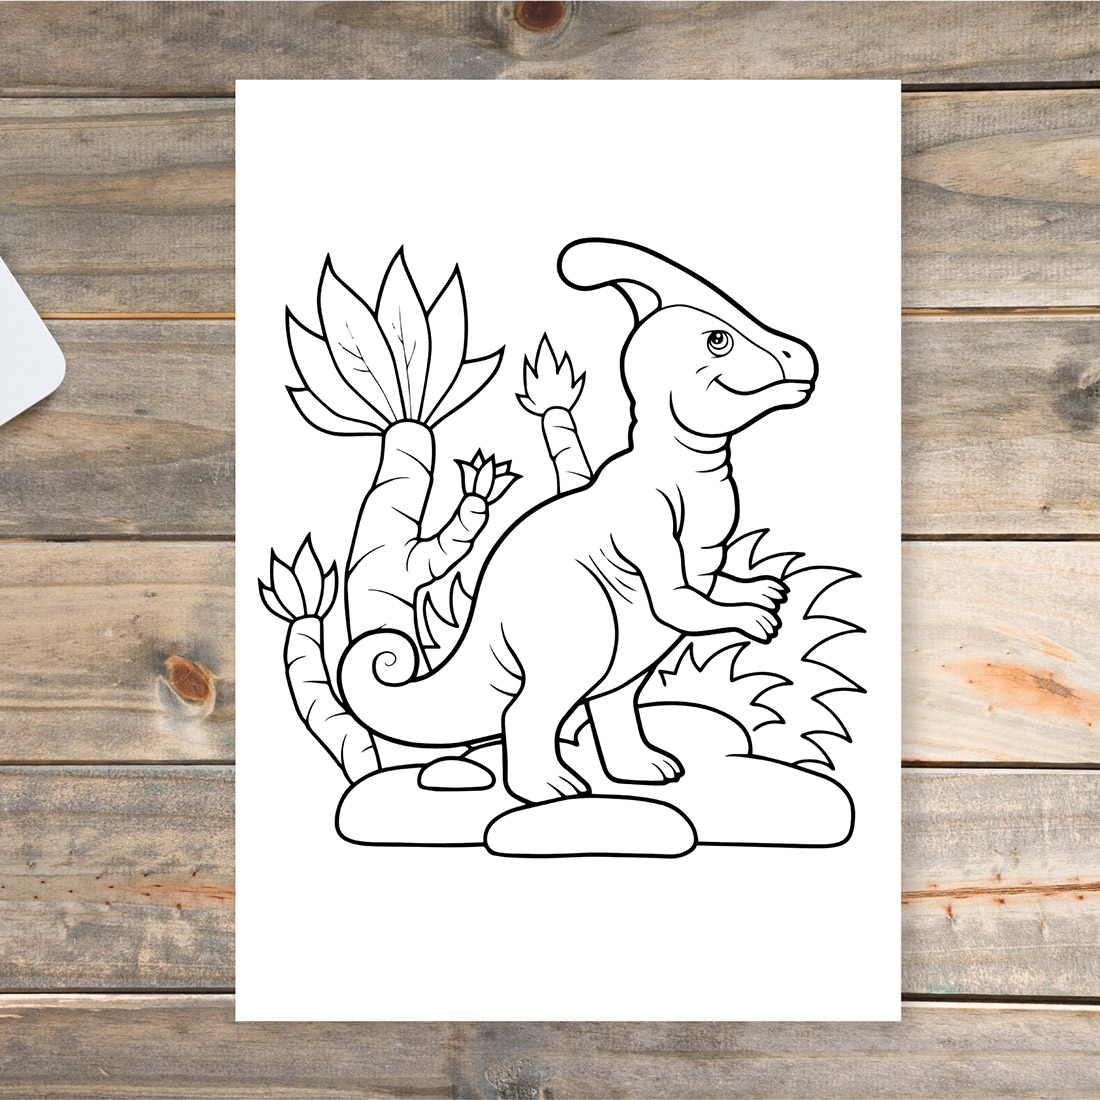 250 Vector Dinosaur Coloring Pages preview image.